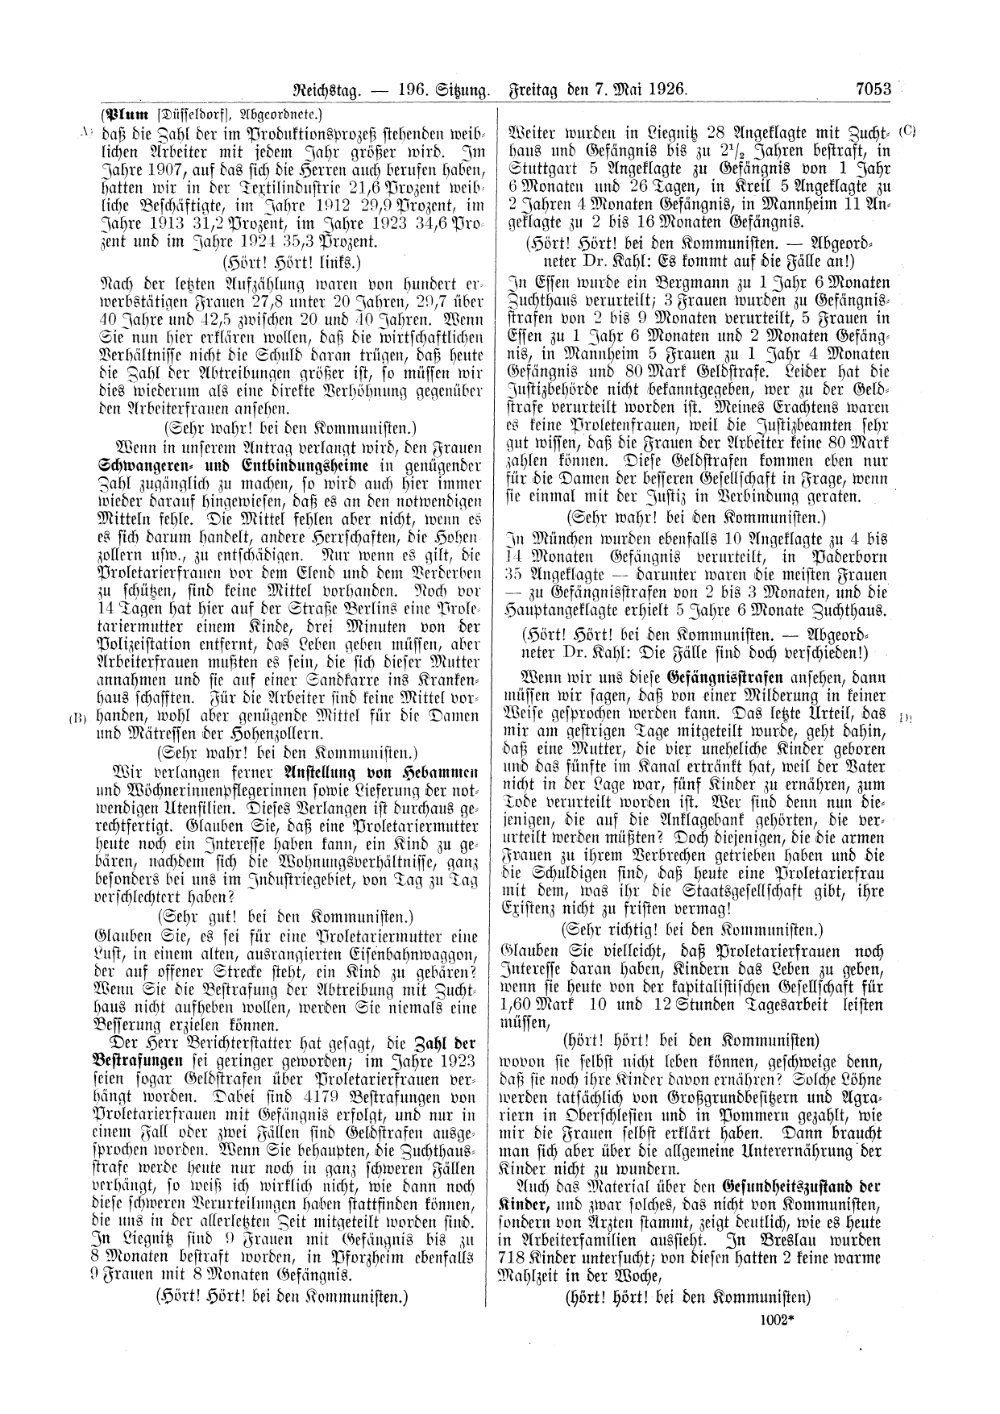 Scan of page 7053